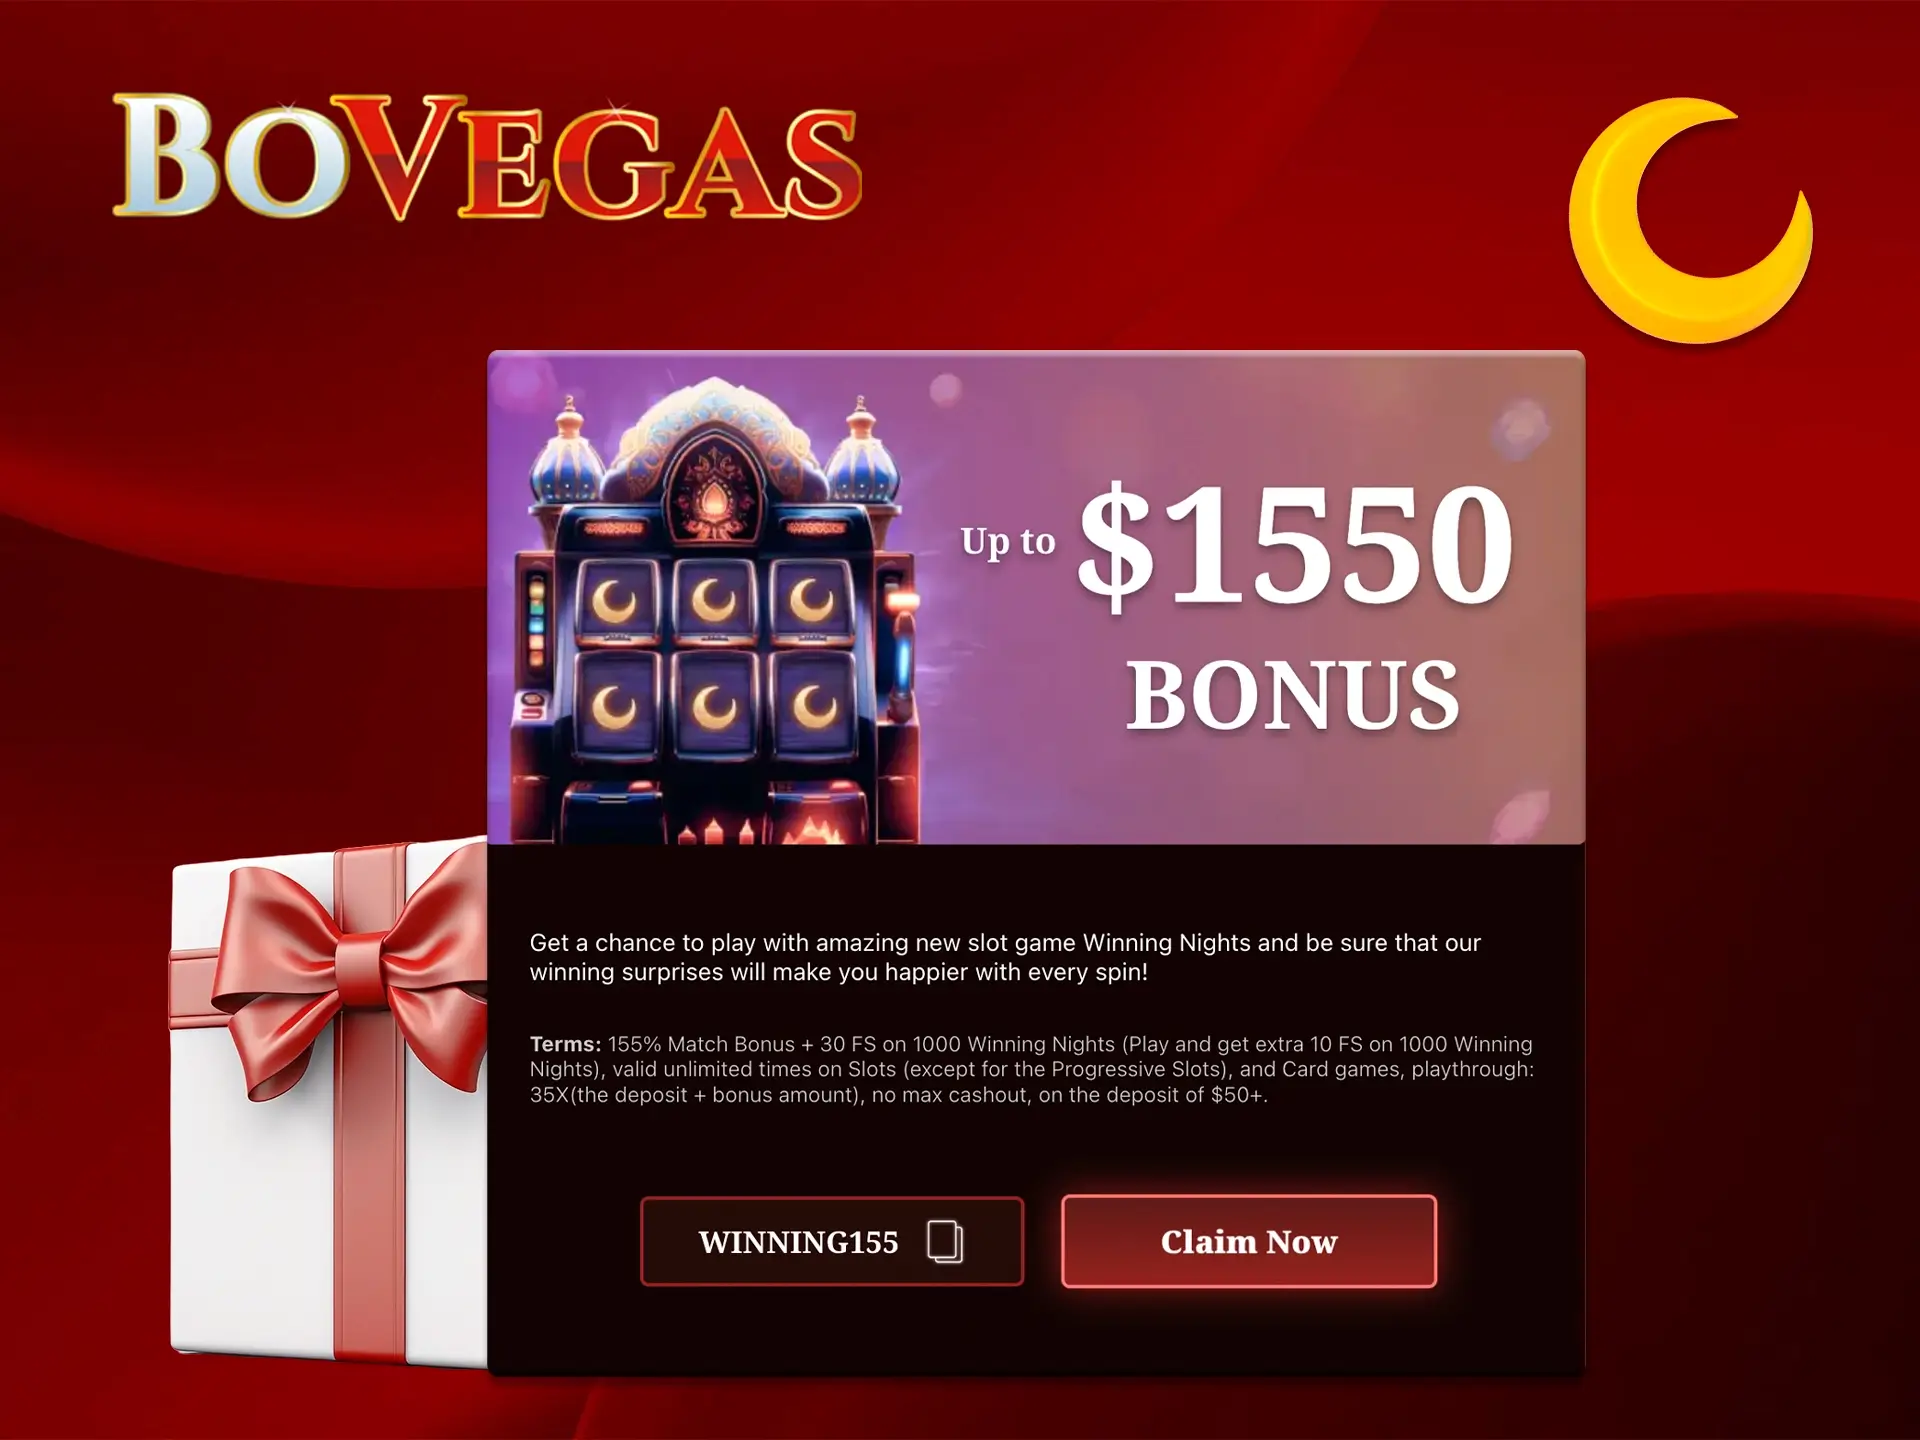 Play the Winning Nights slot with an exclusive BoVegas bonus of 155% up to 2,400 AUD and 30 FS.